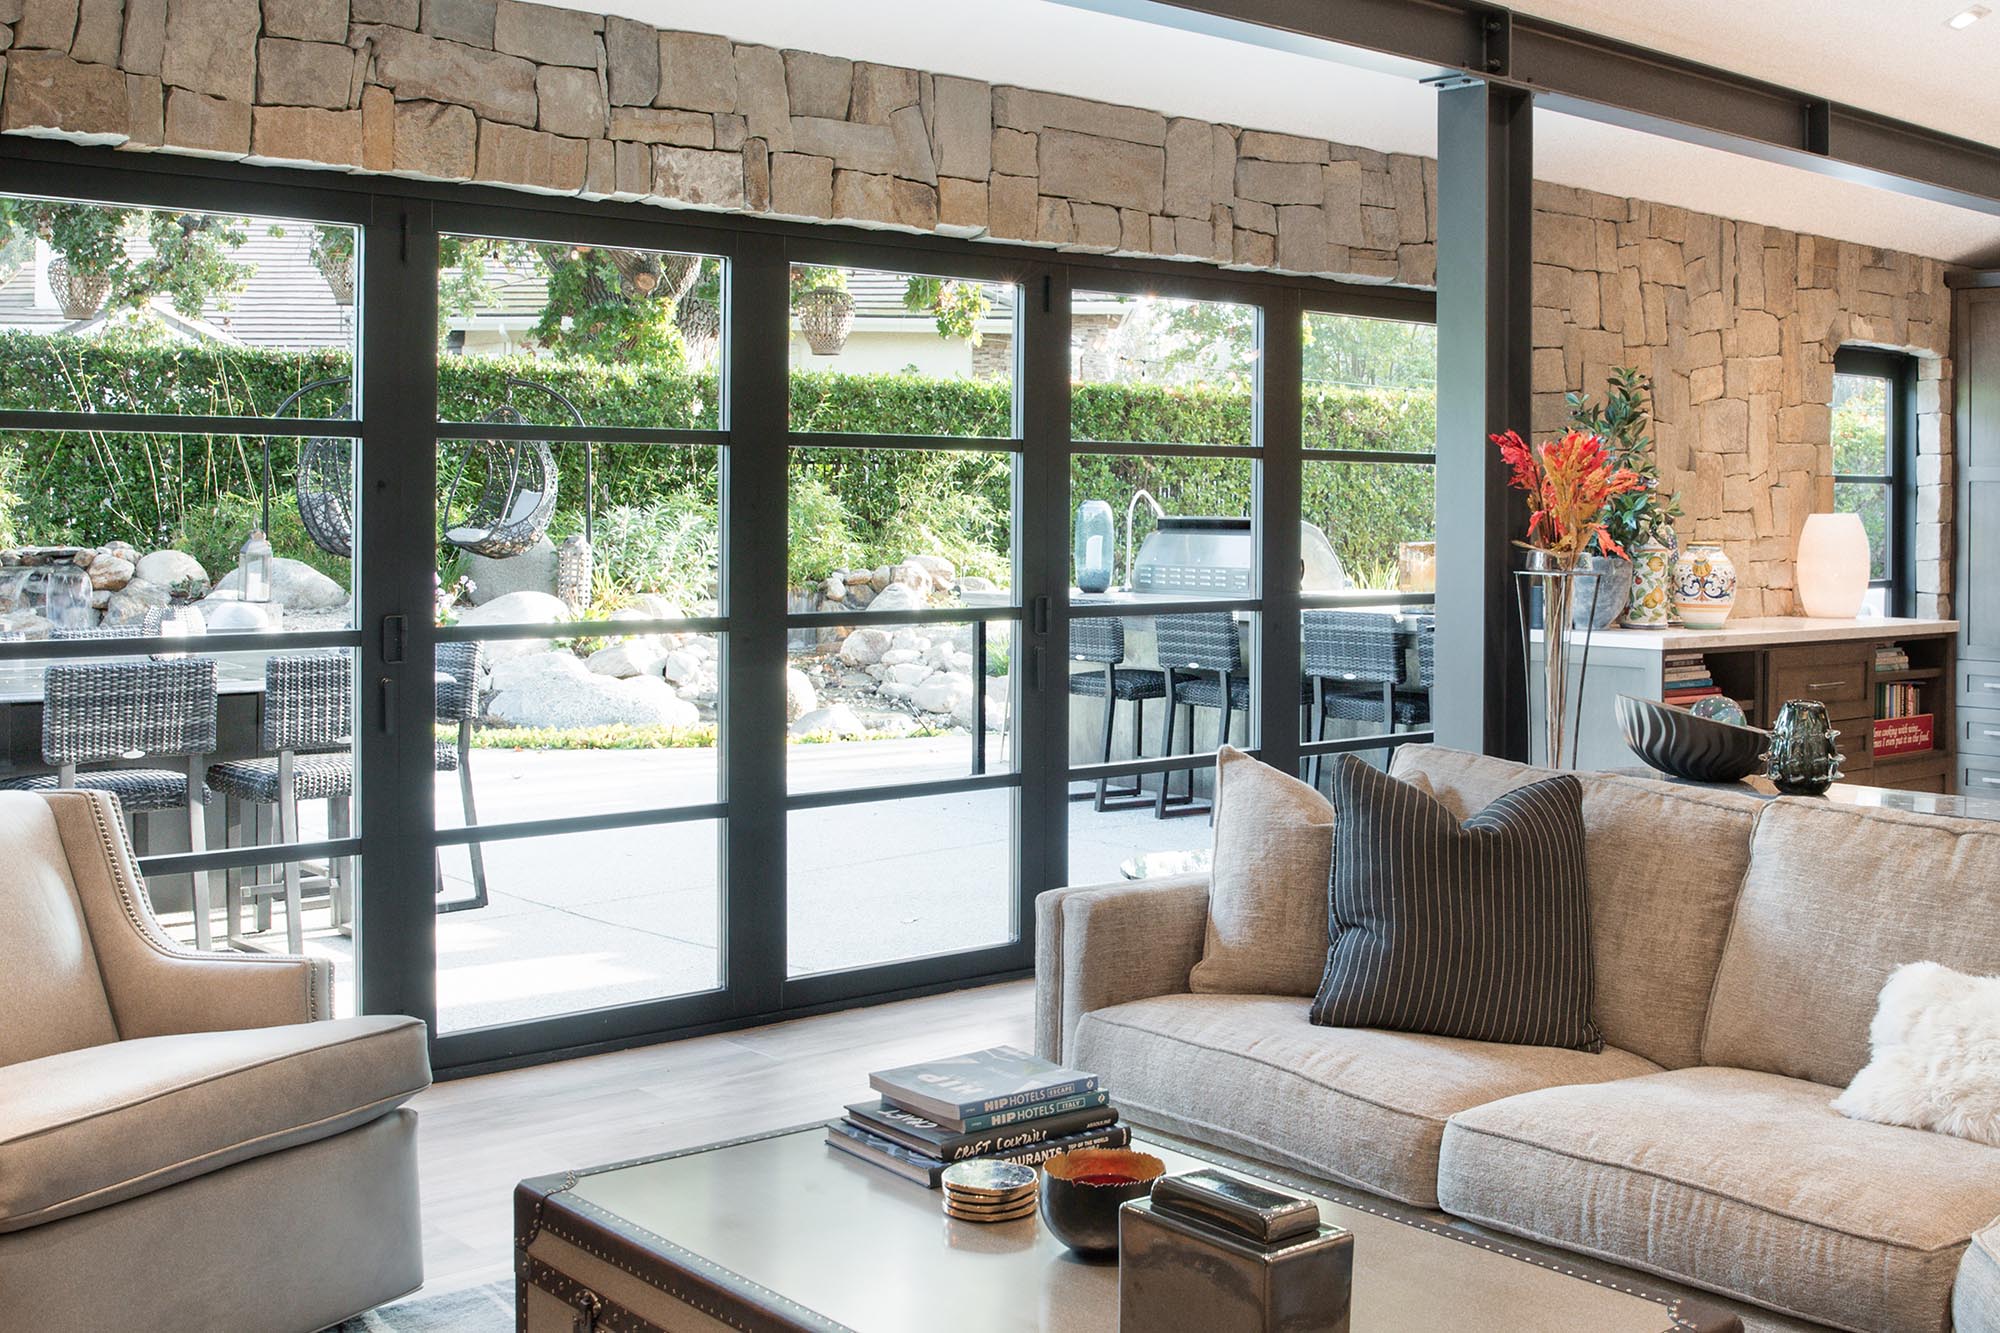 The wall length bi-fold door with divided lights frames backyard views in this living room.